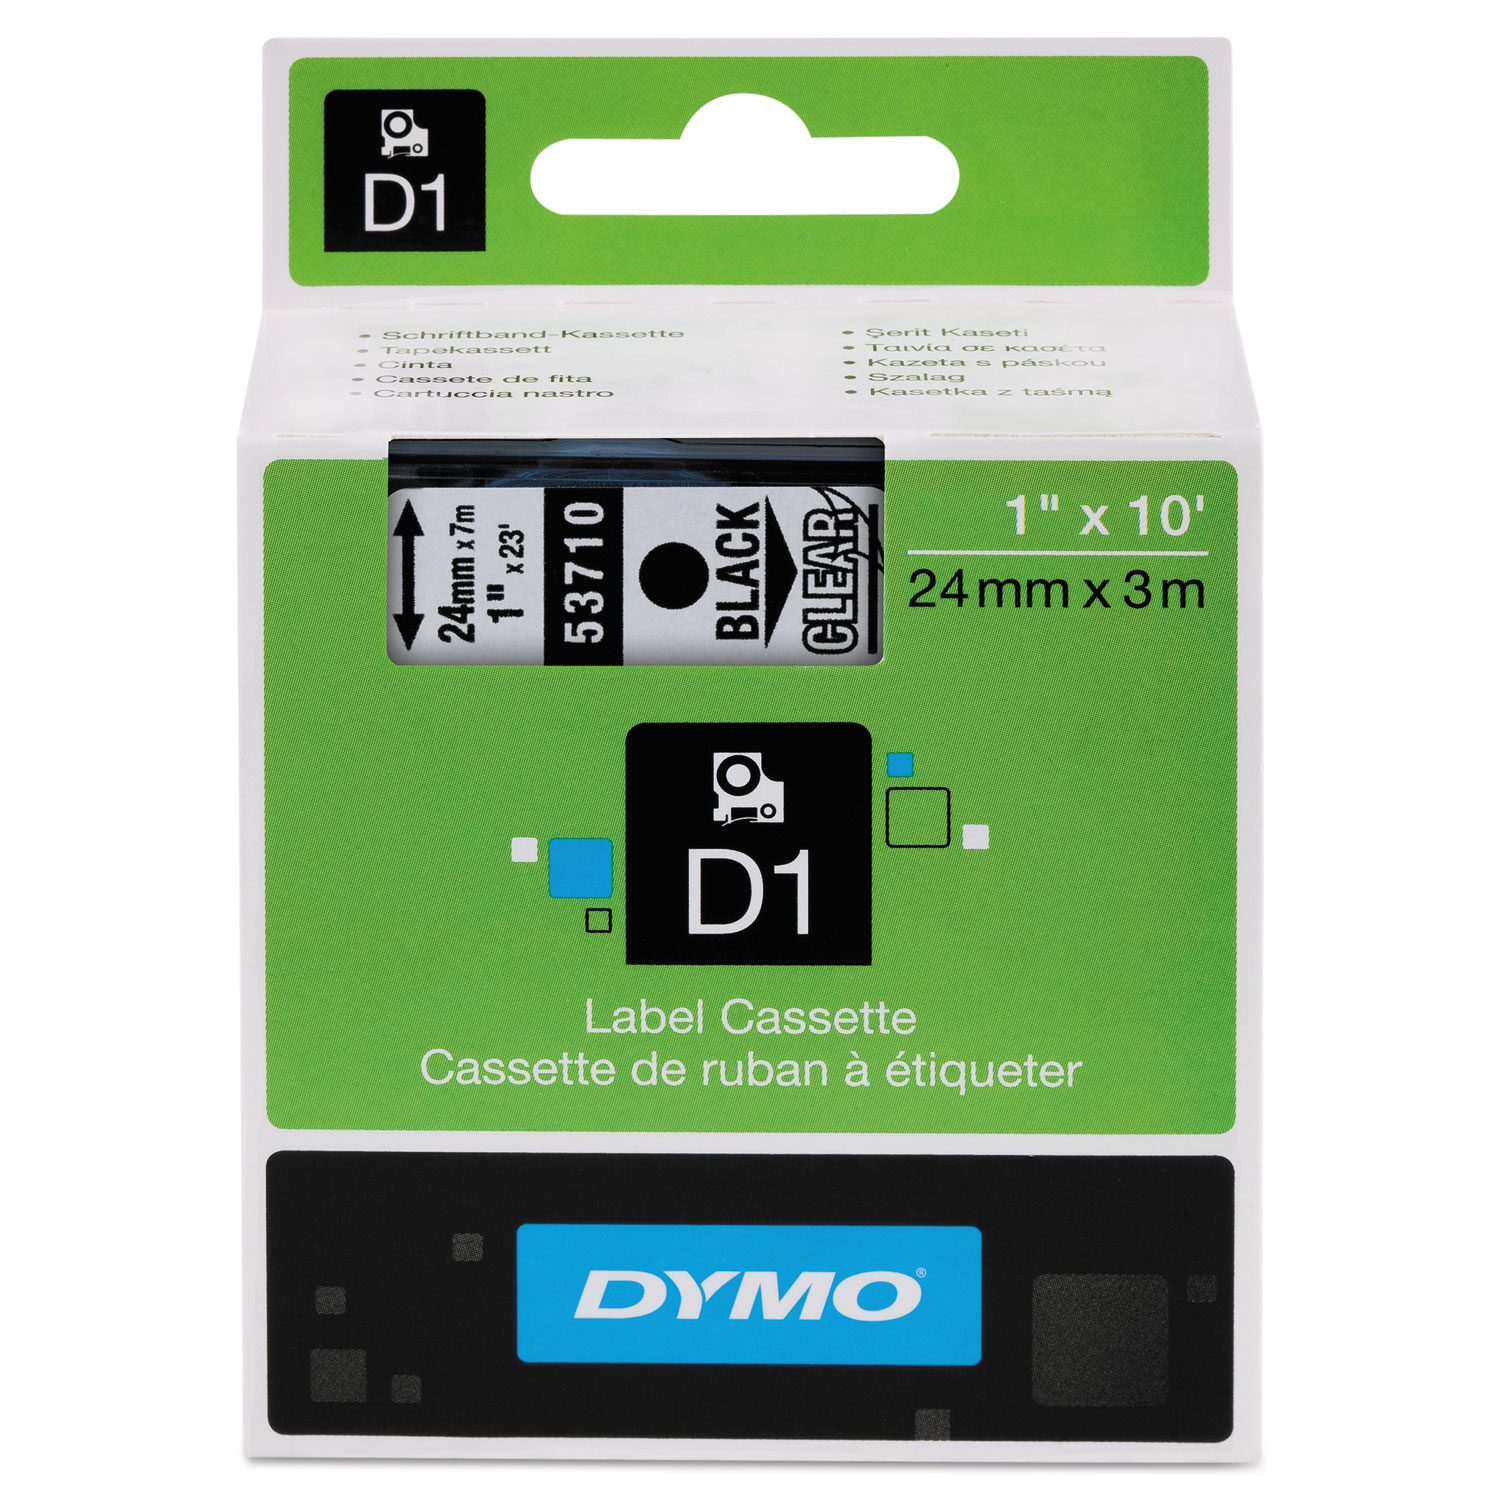 D1 High-Performance Polyester Removable Label Tape, 1 x 23 ft, Black on Clear